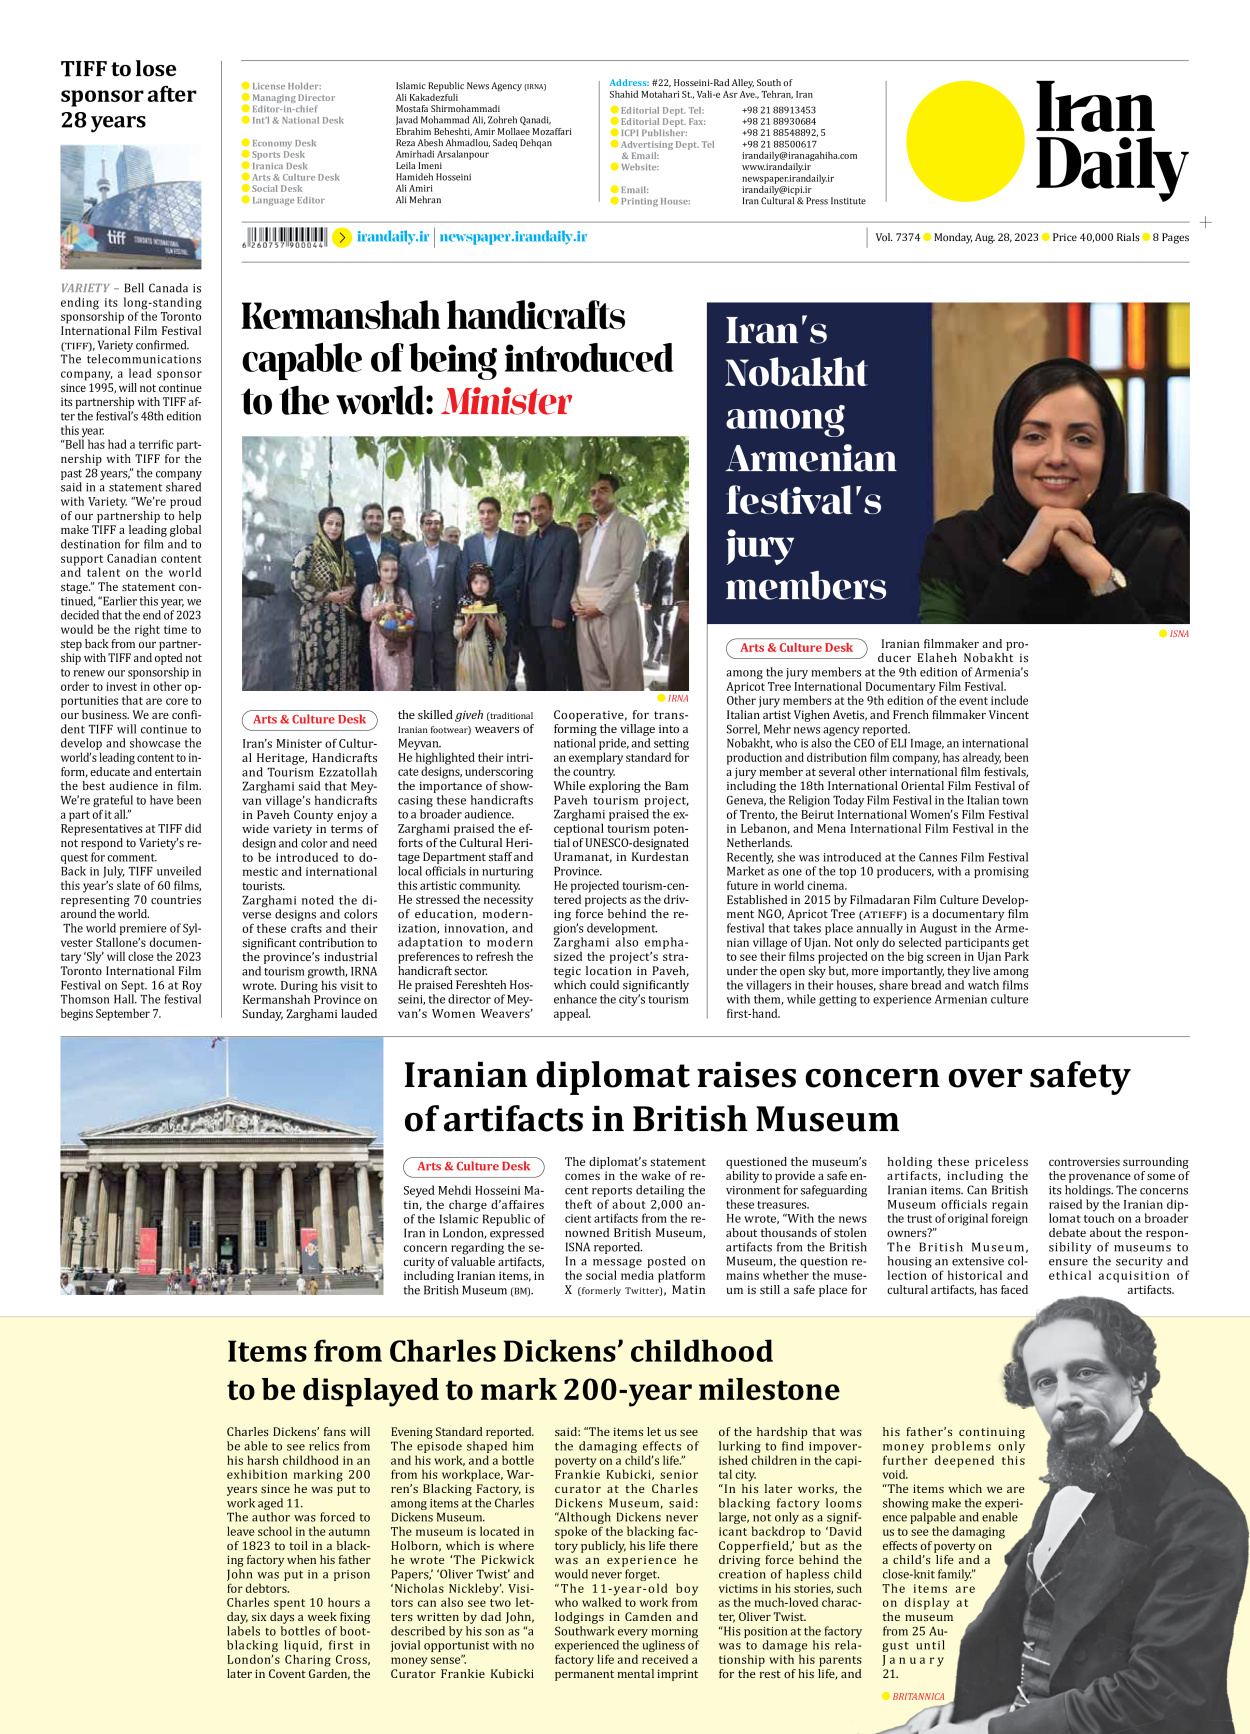 Iran Daily - Number Seven Thousand Three Hundred and Seventy Four - 28 August 2023 - Page 8